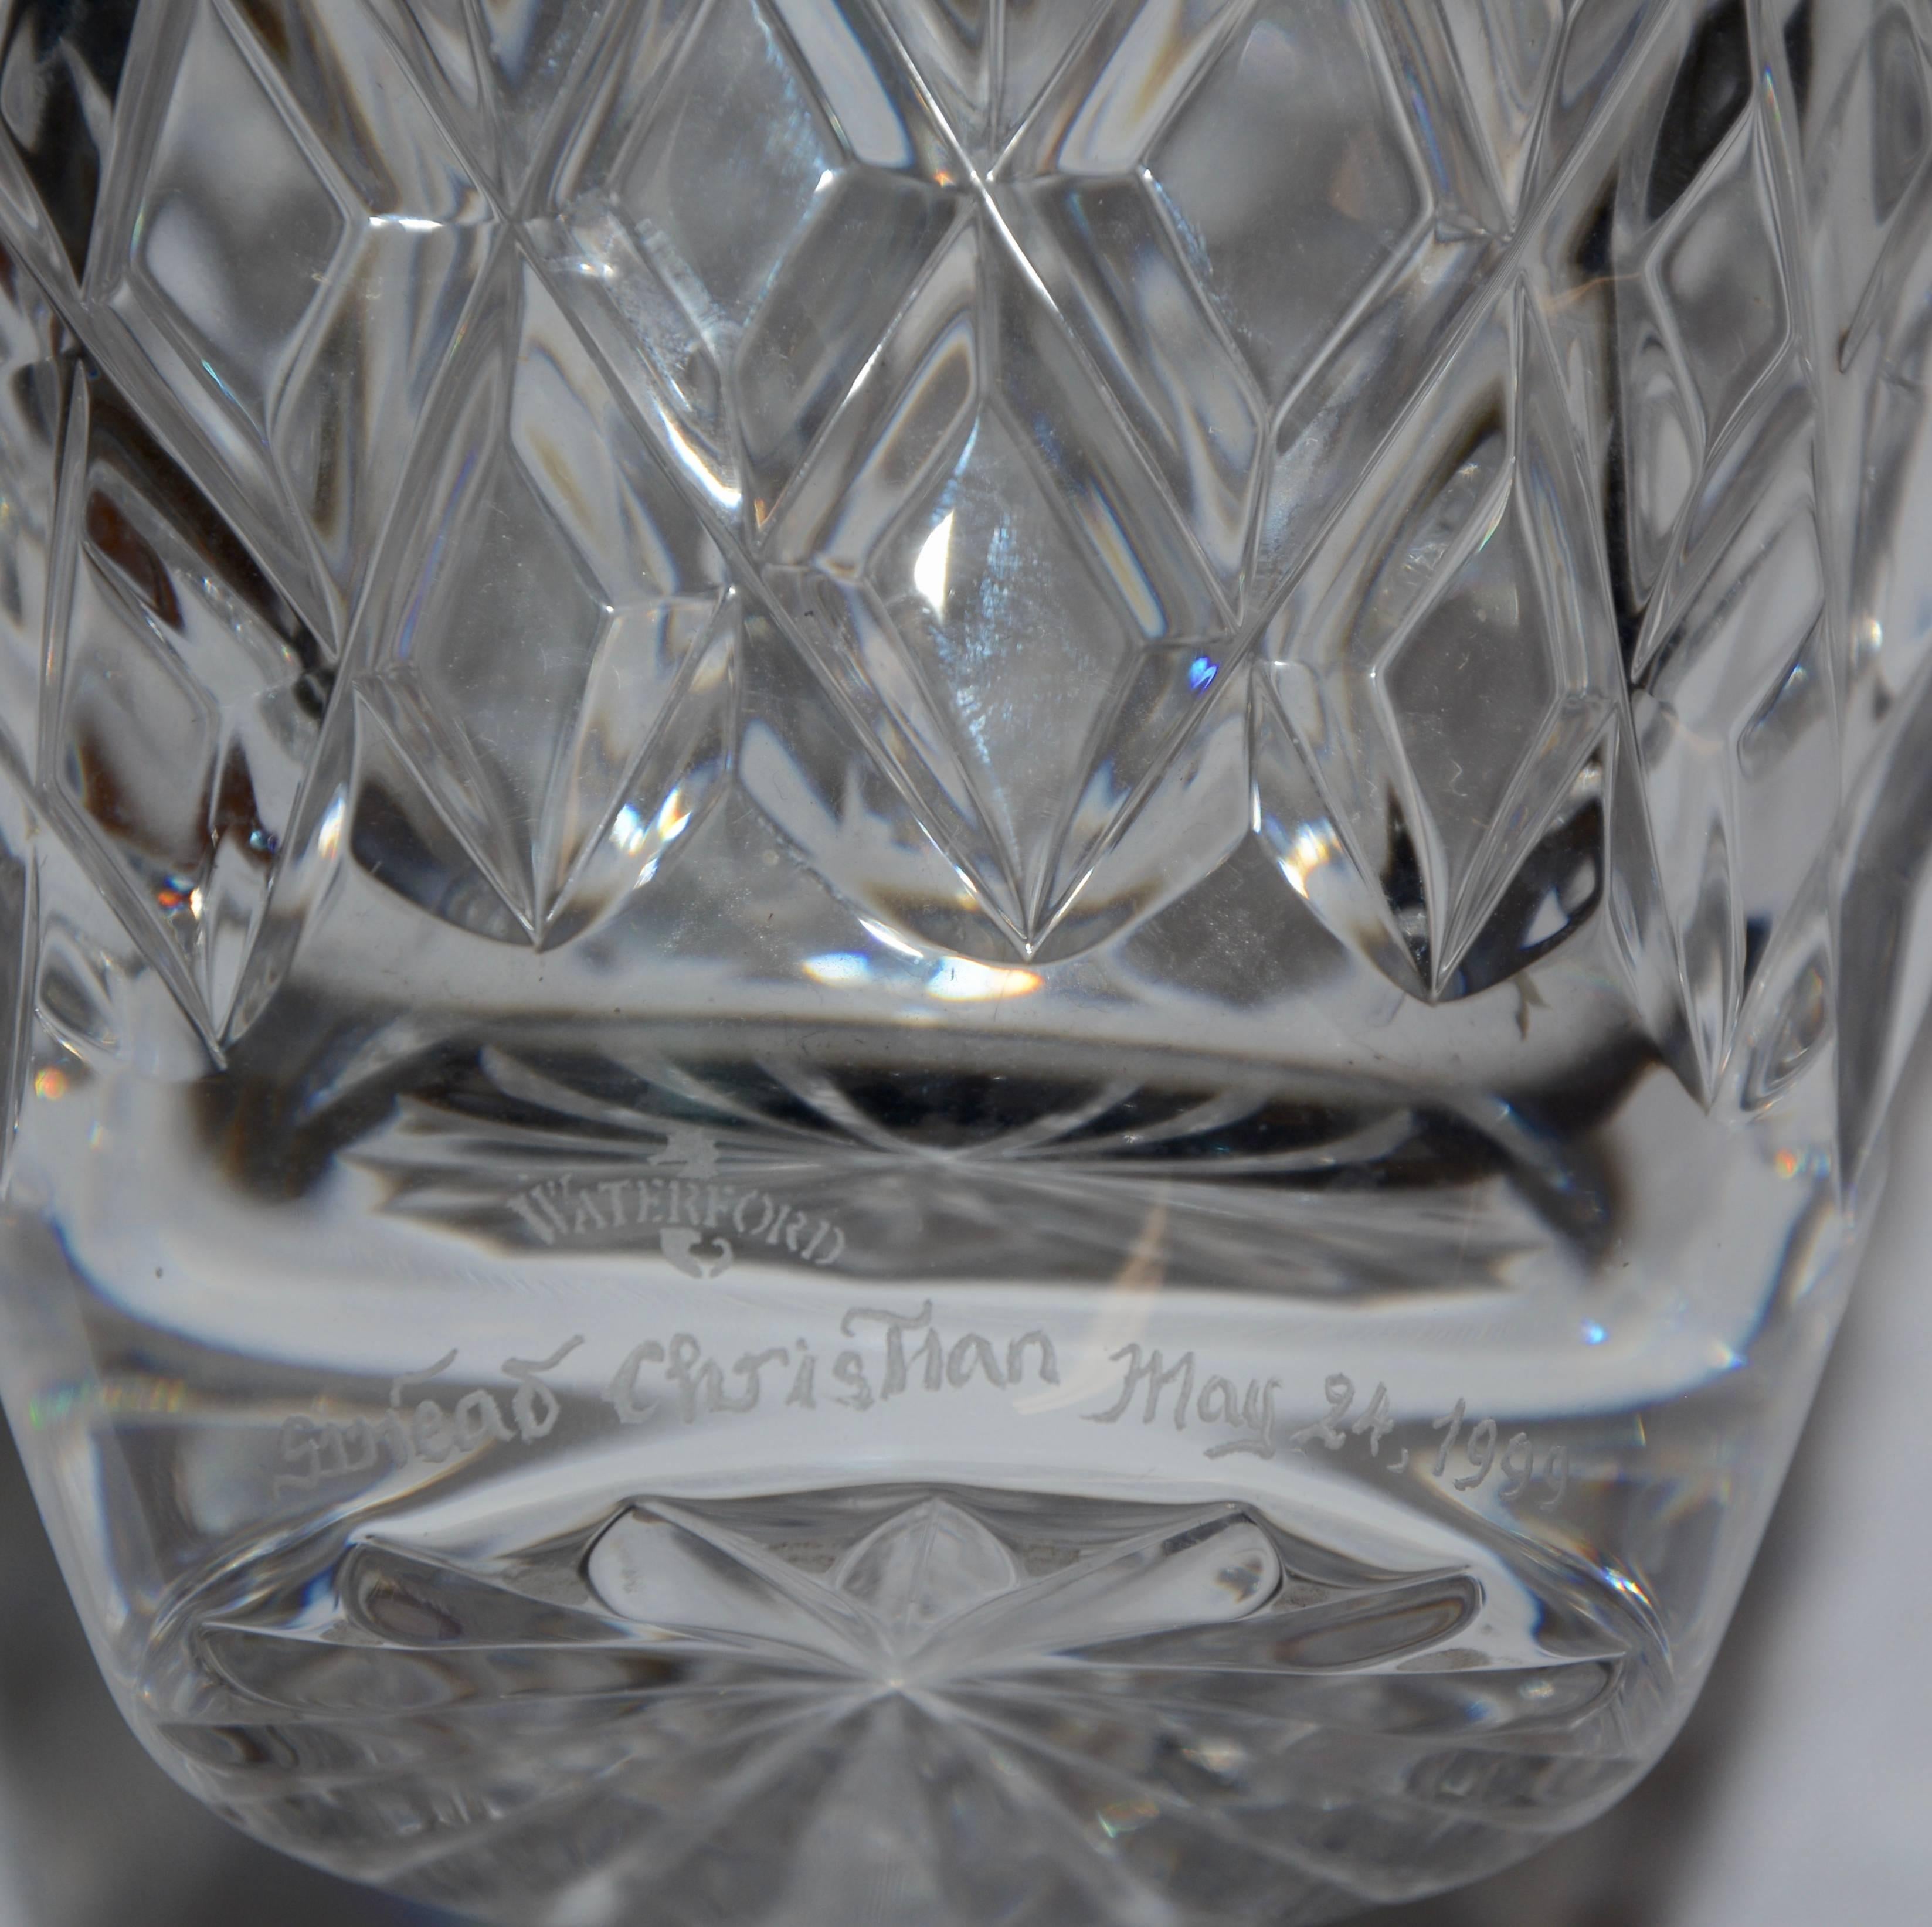 Hand-Crafted Heavy Cut Crystal Diamond Pattern Waterford Vase Signed Sinead Christian, 1999